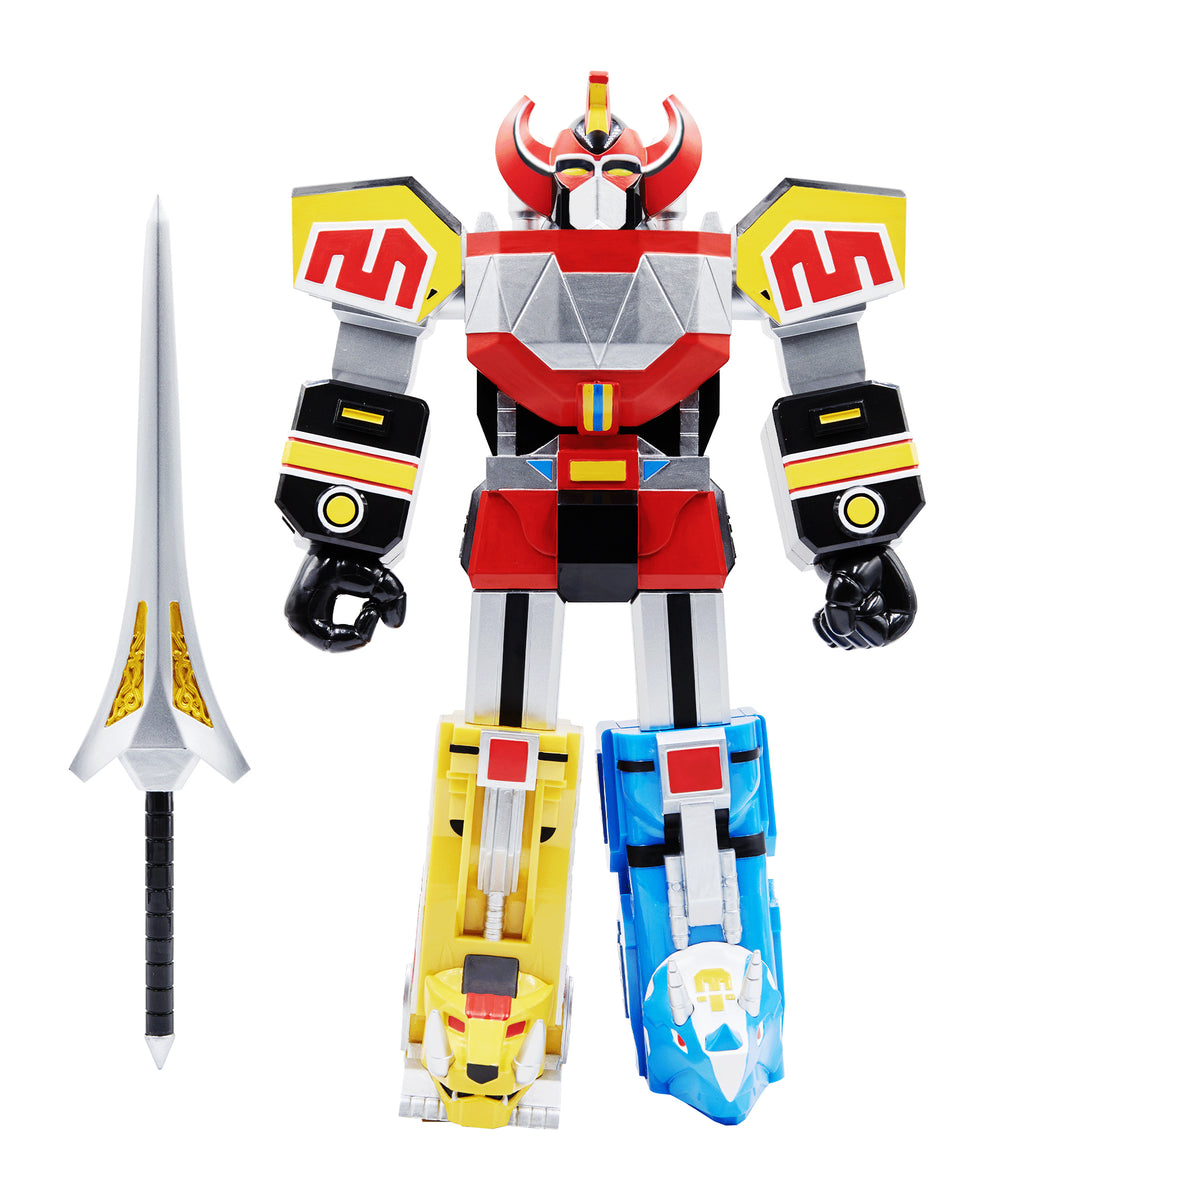 Dino Megazord Action Figure by Super 7